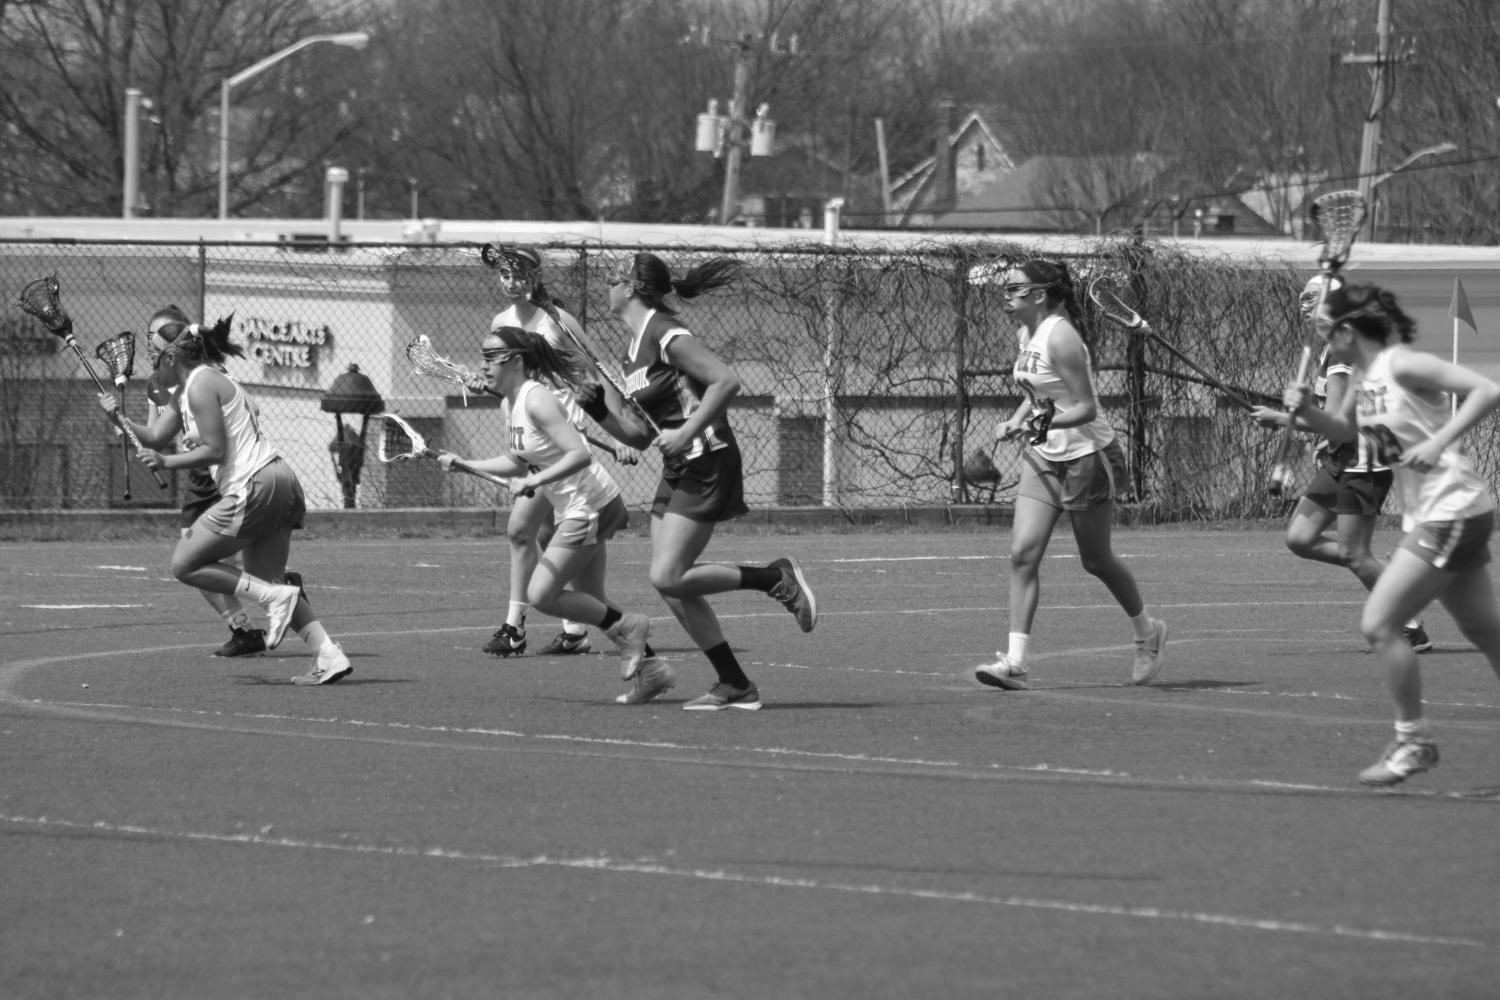 The+Vikings+girls+lacrosse+team+skirmishes+midfield+at+a+home+game+against+Lynbrook+on+April+10.+The+Vikings+won+the+game+15-7.